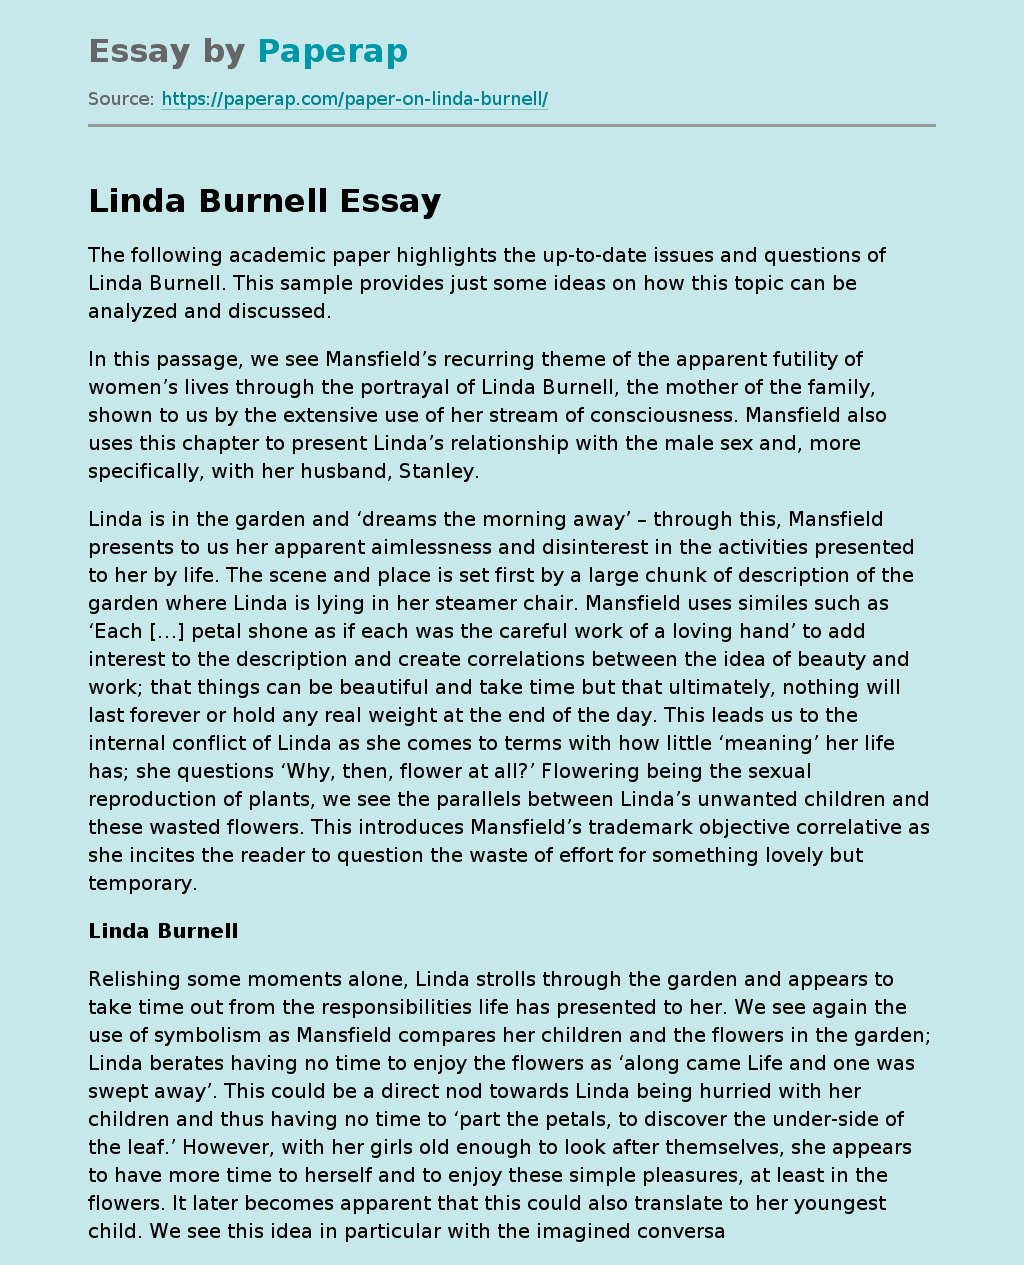 Current Issues and Questions by Linda Burnell